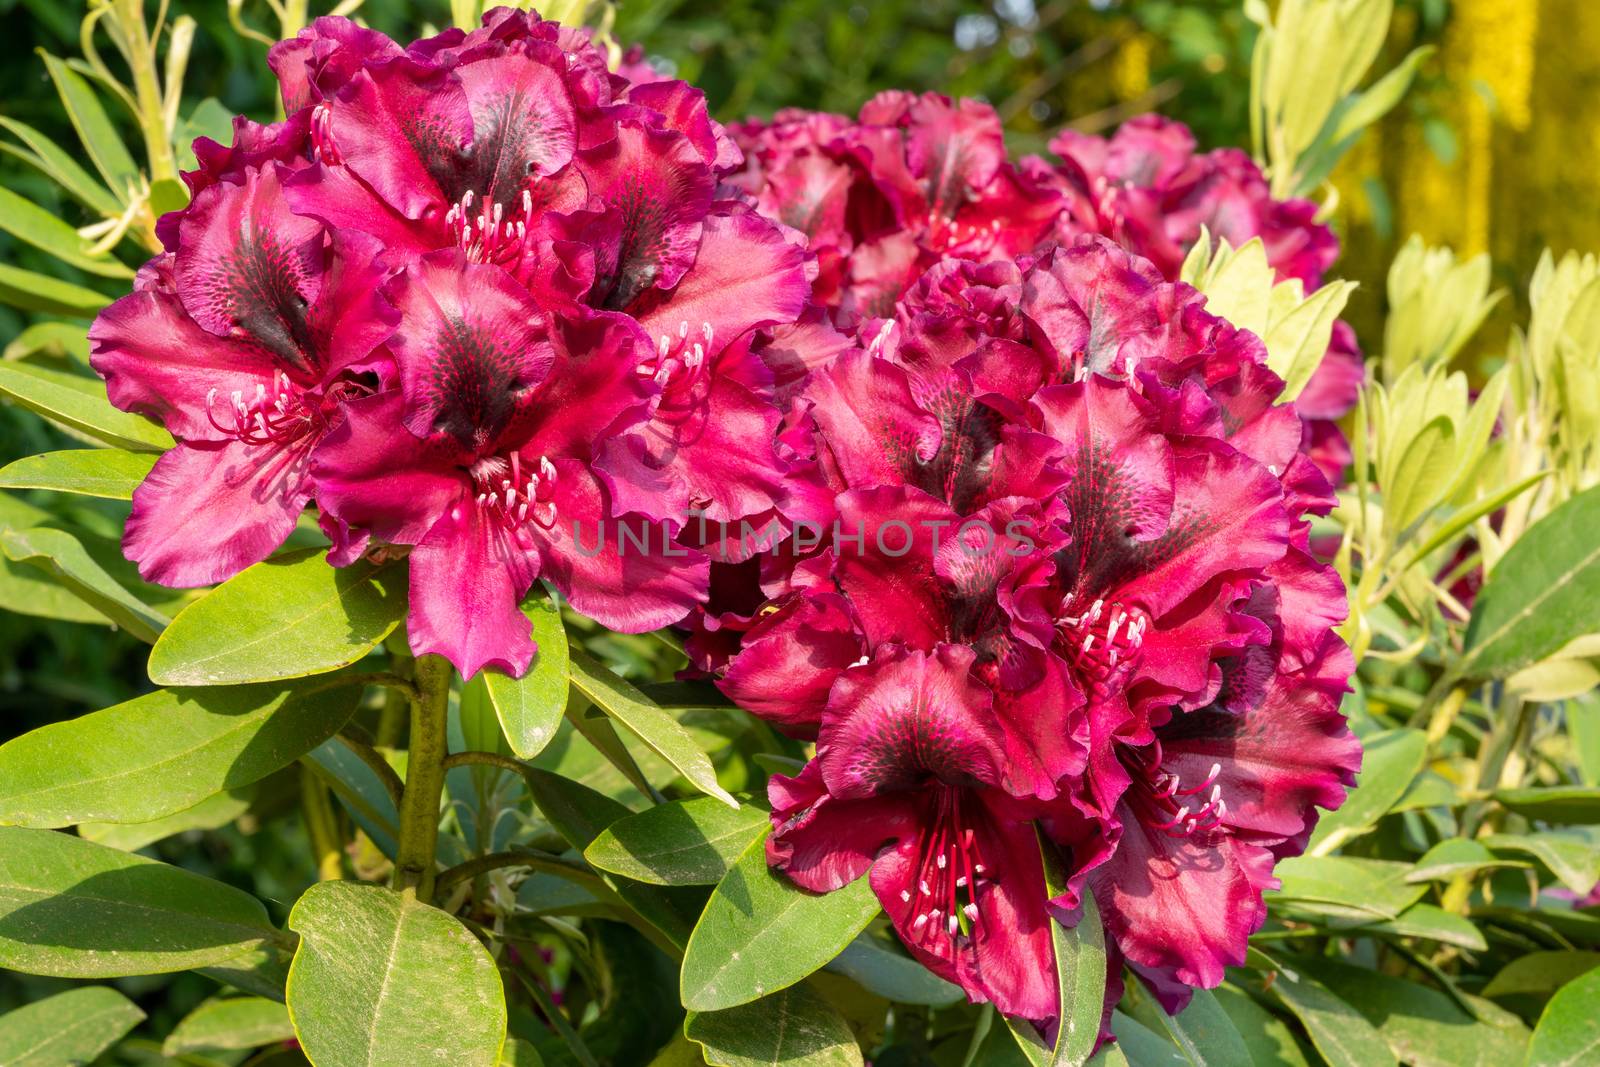 Rhododendron Hybrid Midnight Beauty, Rhododendron hybride by alfotokunst